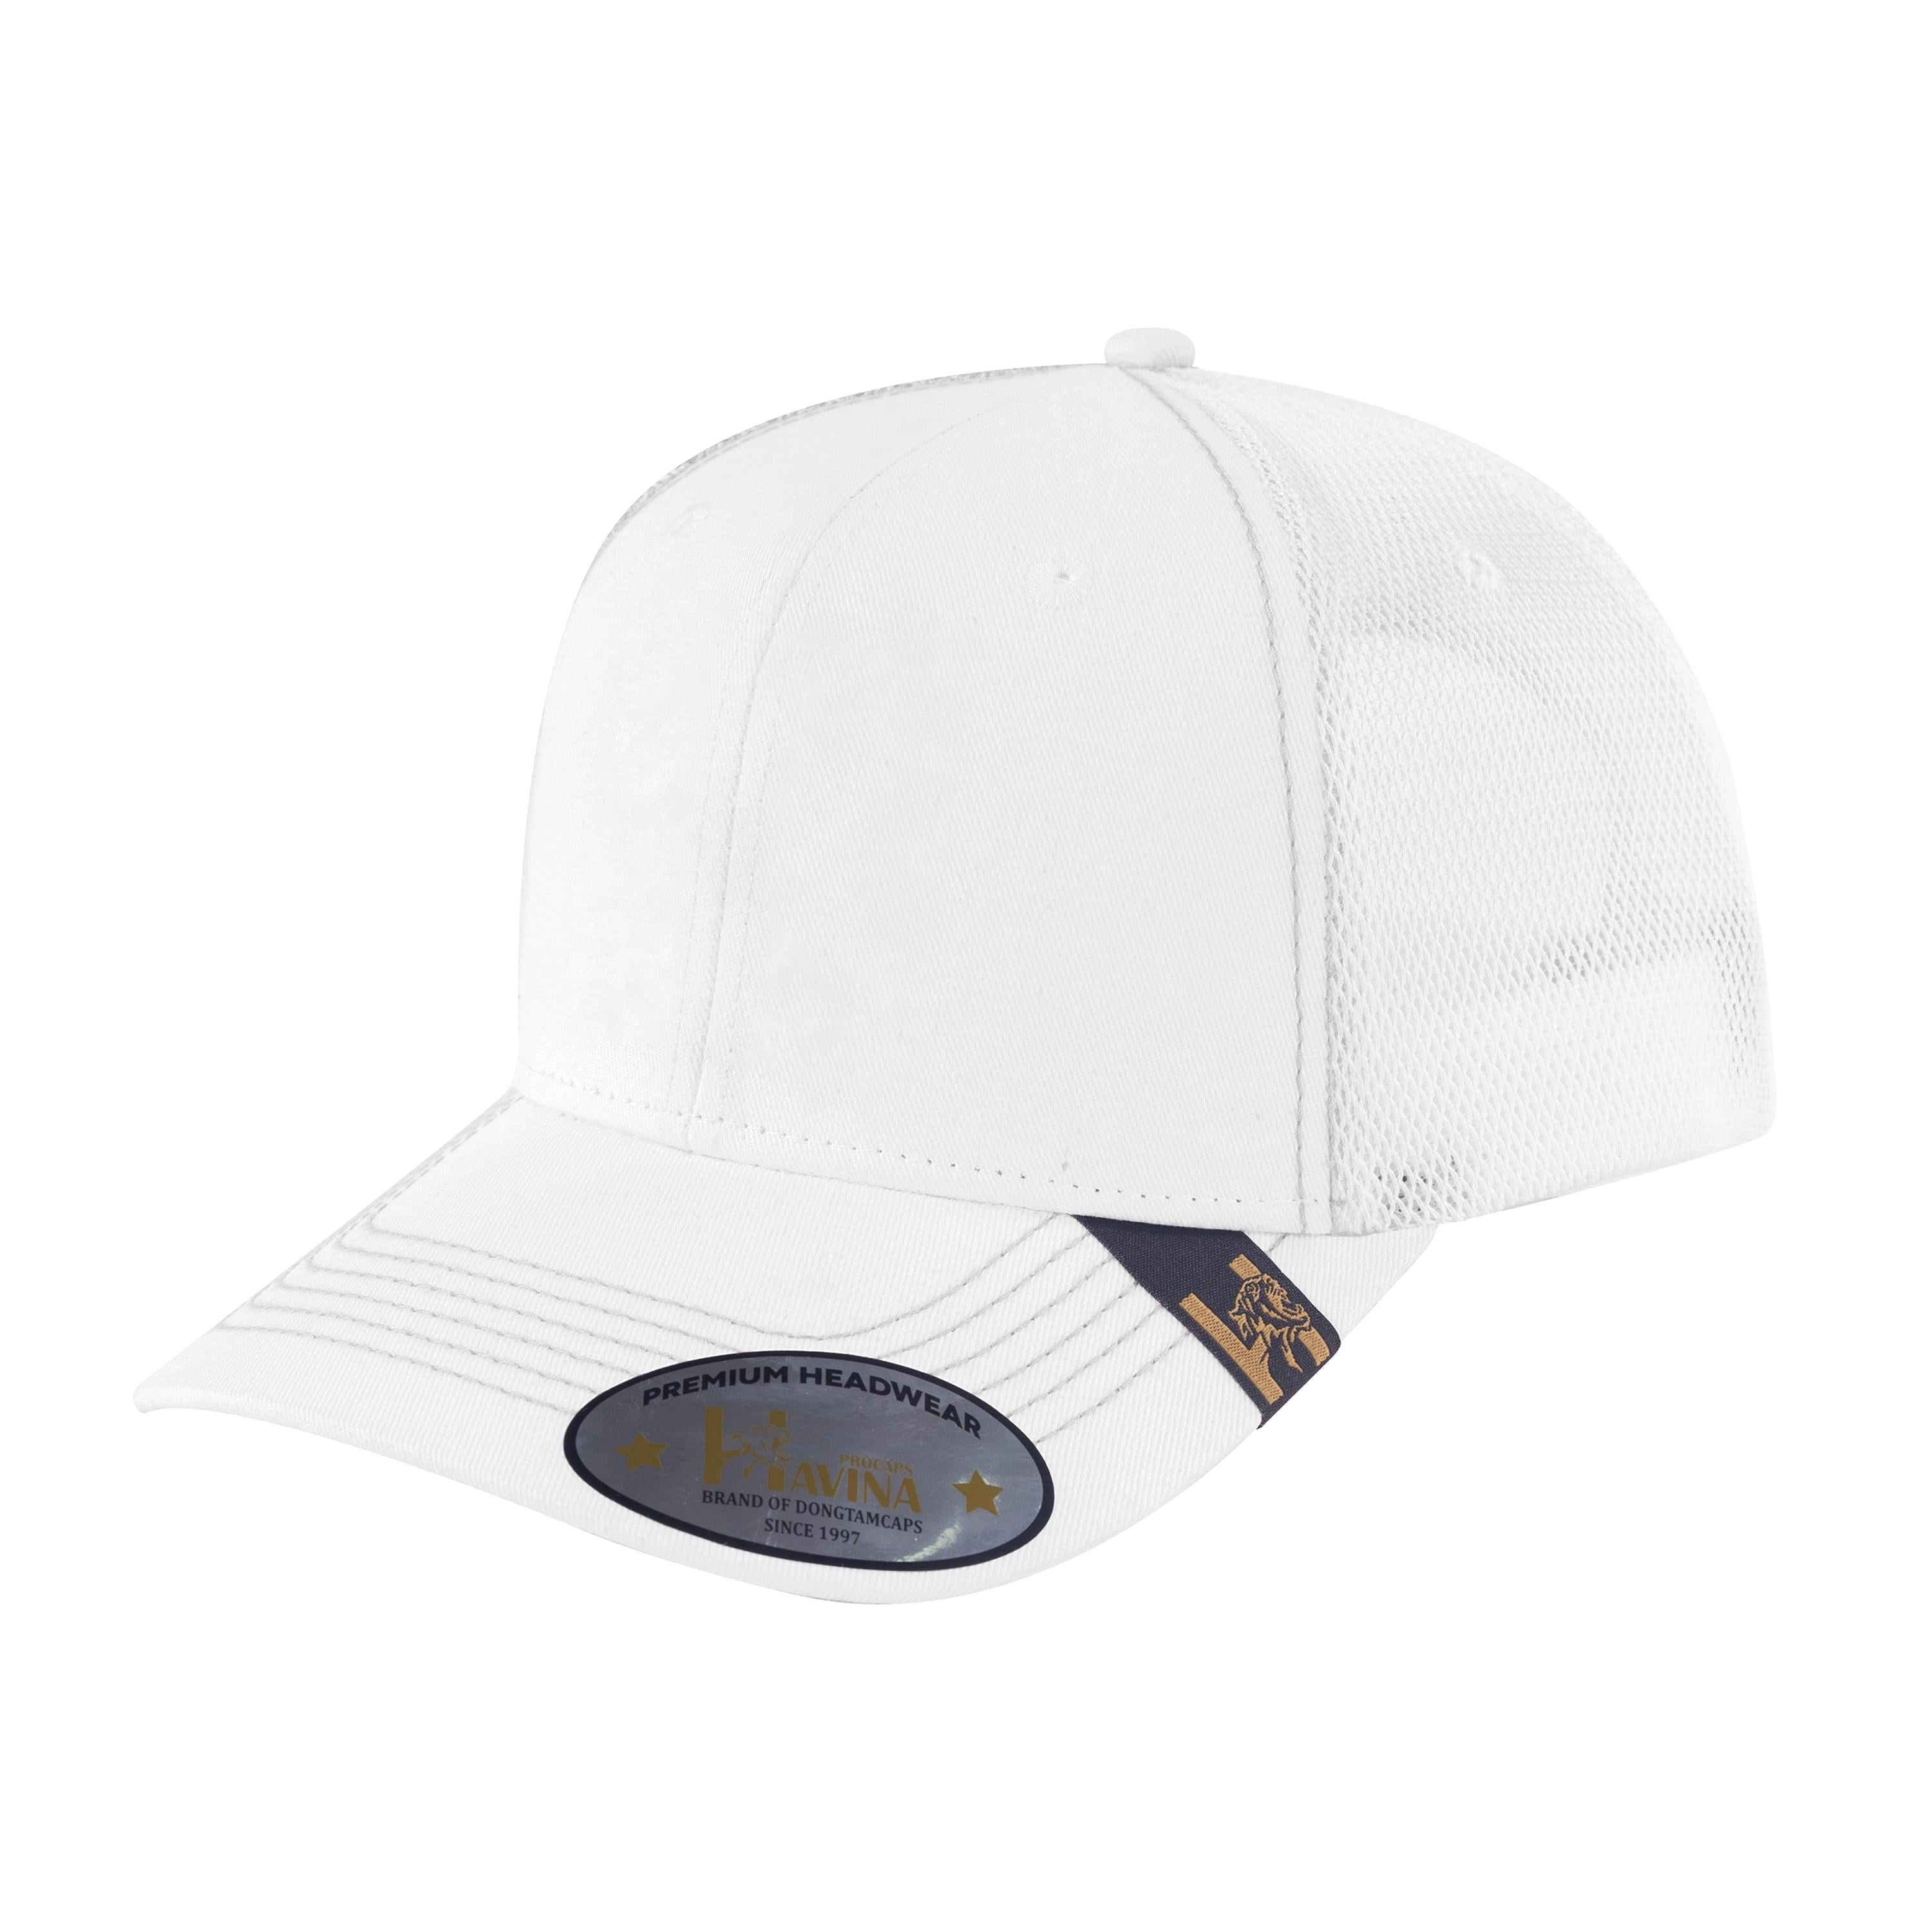 Yupoong 6511W Flexfit Trucker Mesh with White Front Panels Cap 